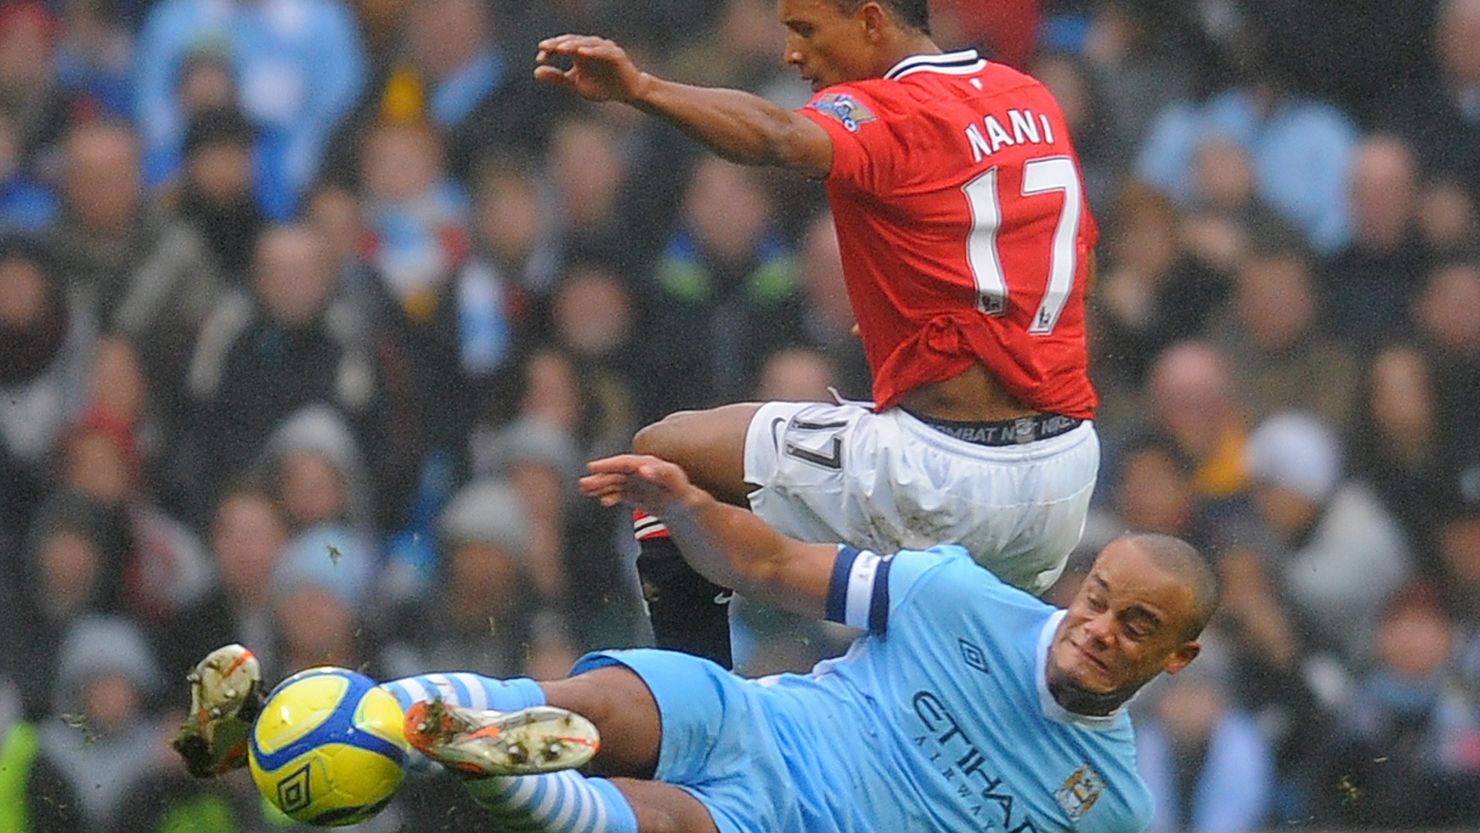 Manchester City captain Vincent Kompany was sent off for this tackle on Manchester United's Nani on Sunday.